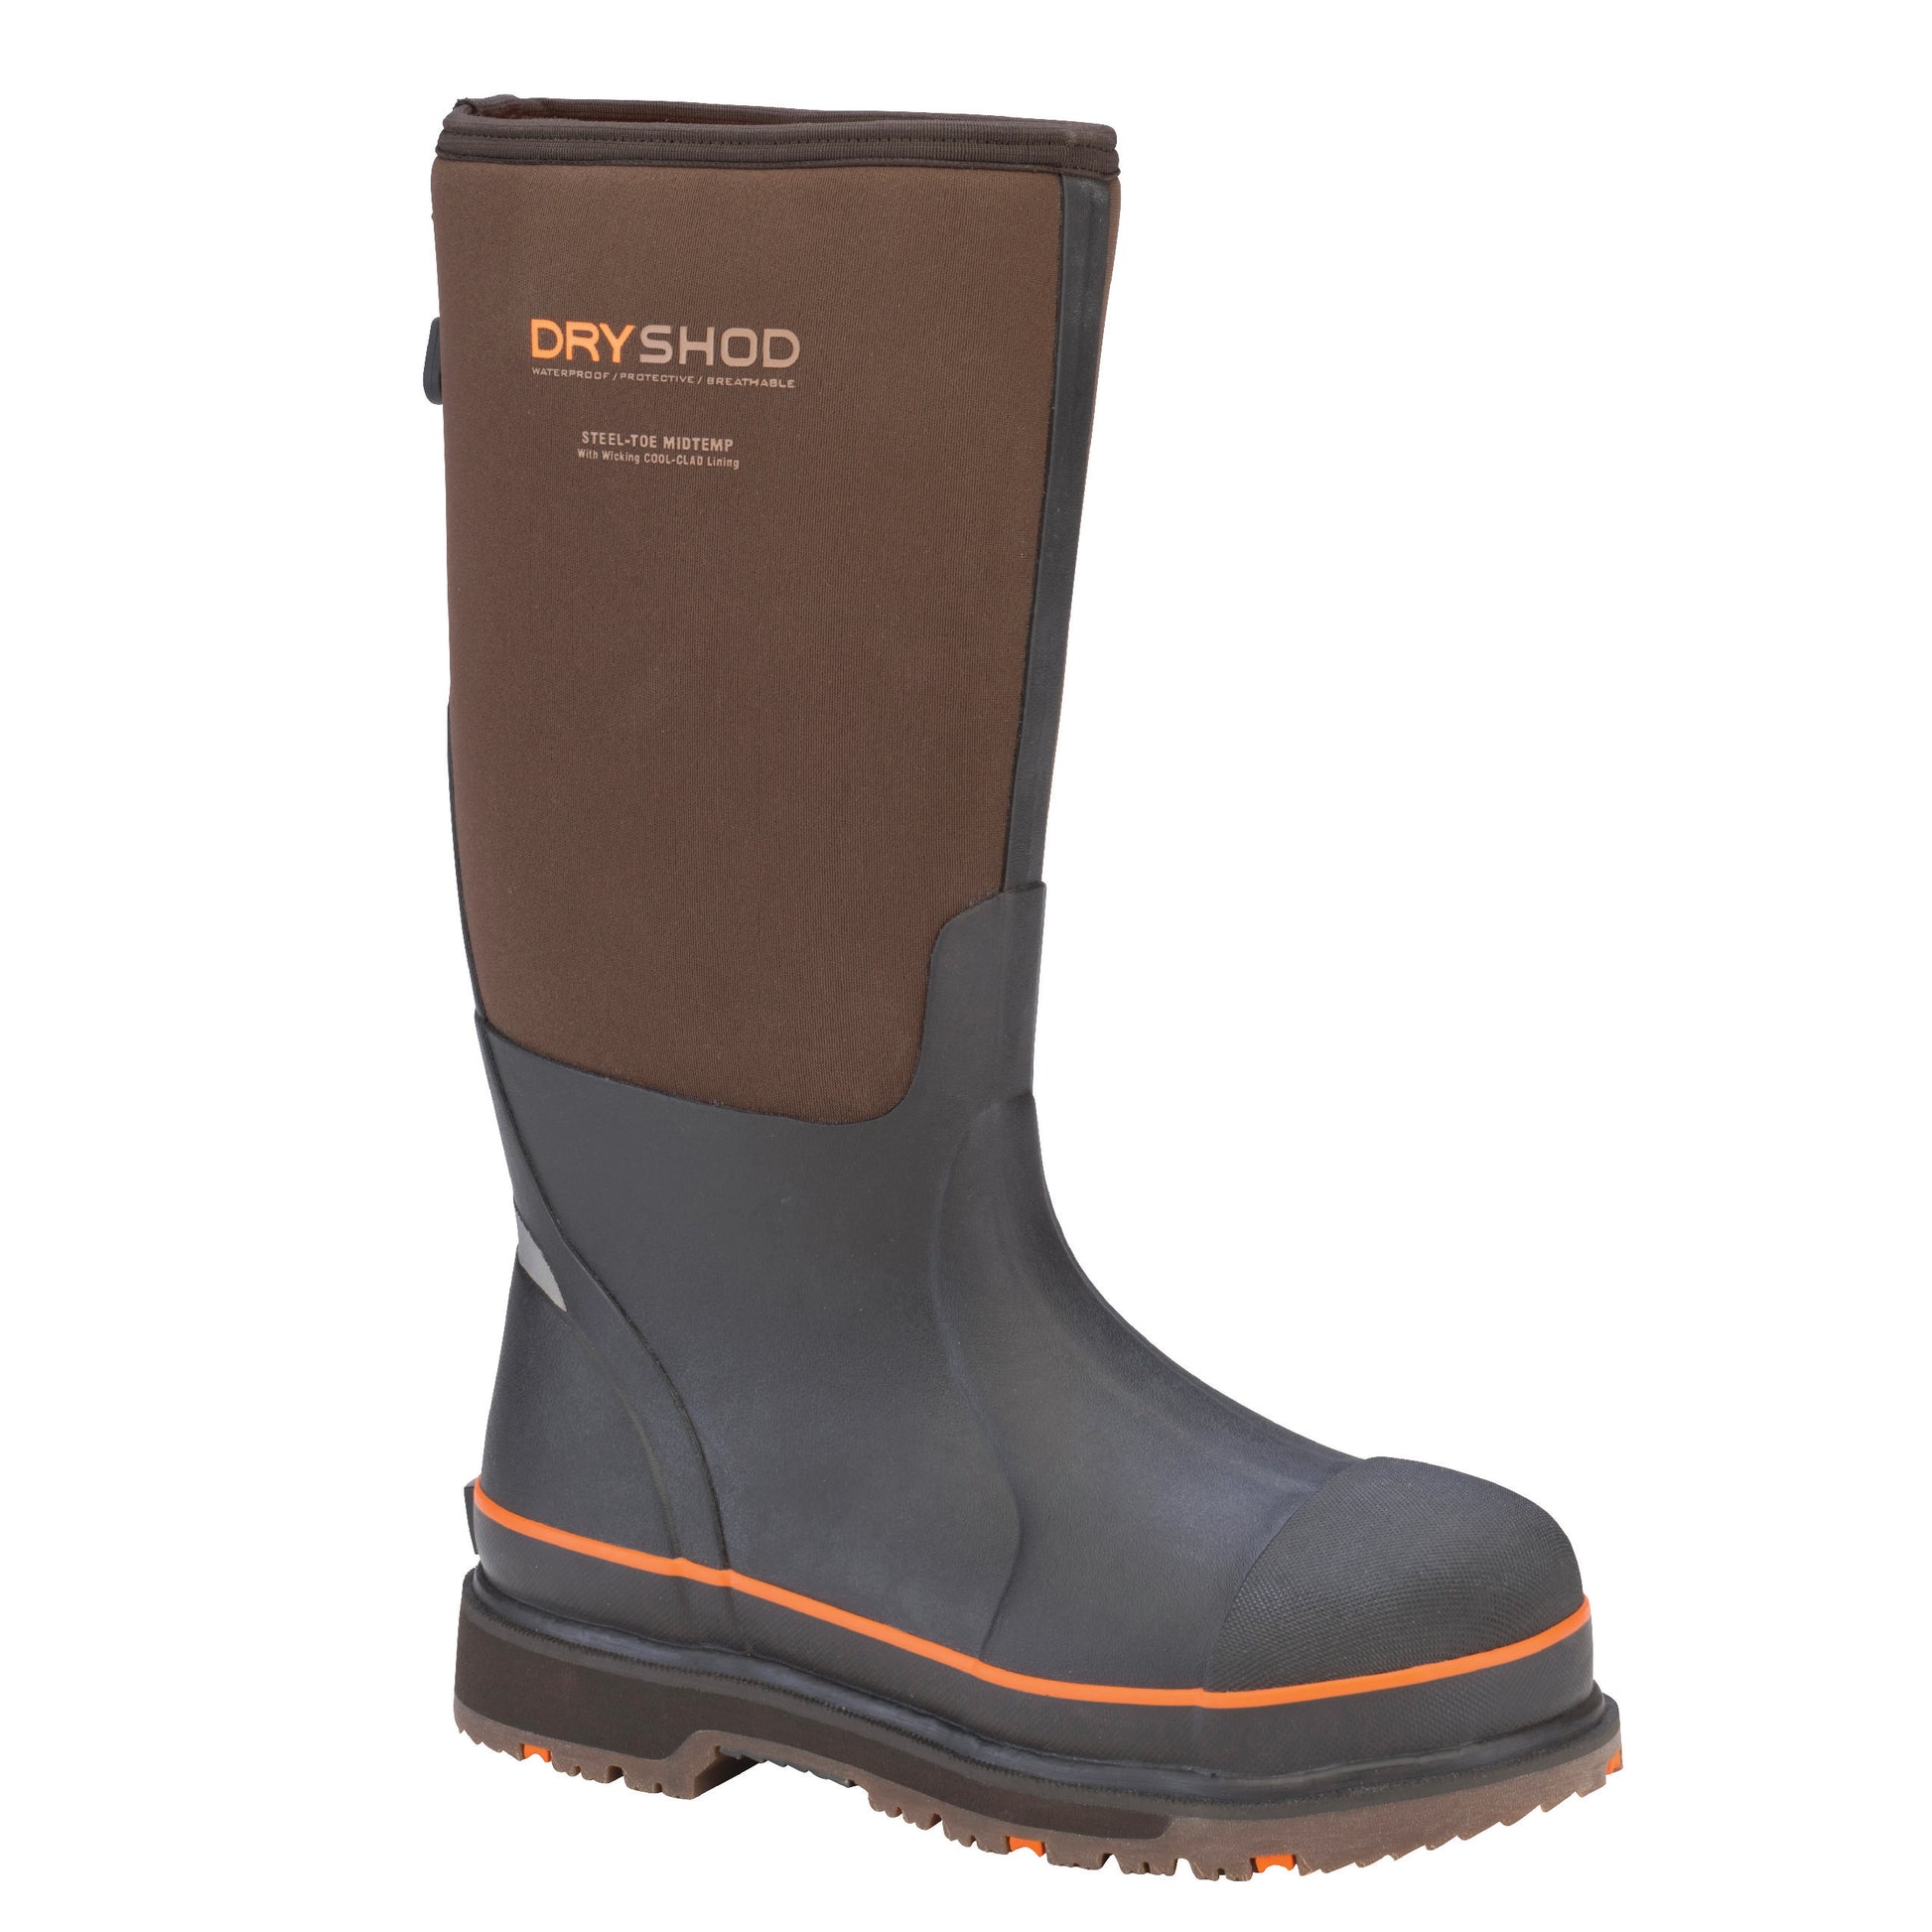 DRYSHOD STEEL TOE WIXIT COOL-CLAD™ PROTECTIVE WORK BOOT - MEN'S